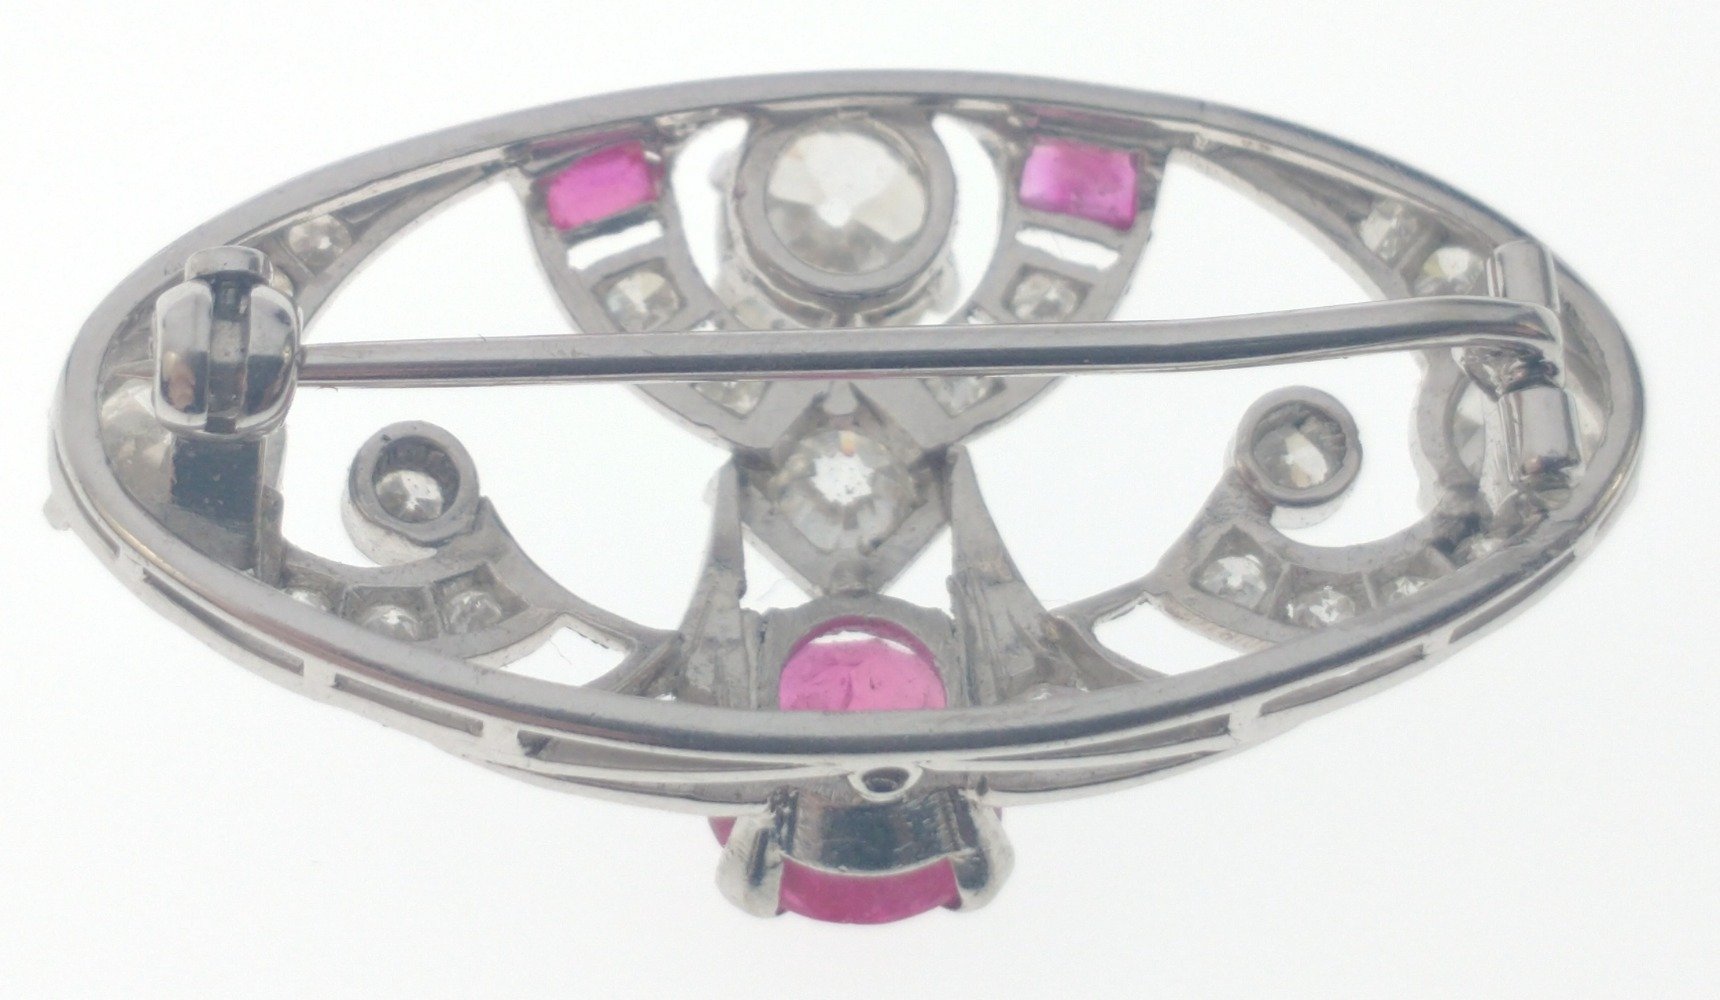 A VINTAGE DIAMOND encrusted 'white metal' pin BROOCH with a central pink stone (0.5cm diameter) - Image 5 of 5